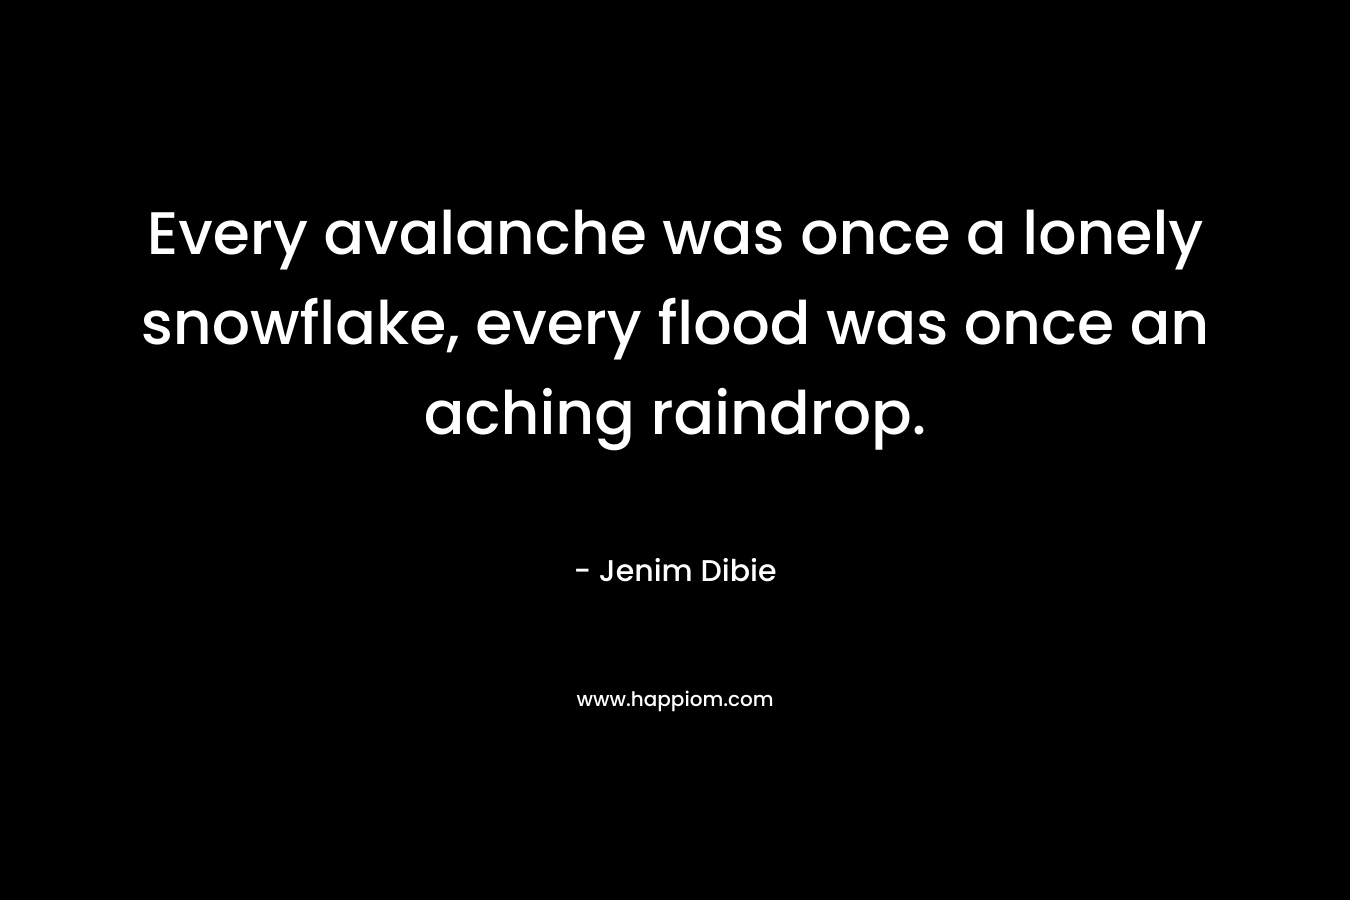 Every avalanche was once a lonely snowflake, every flood was once an aching raindrop. – Jenim Dibie